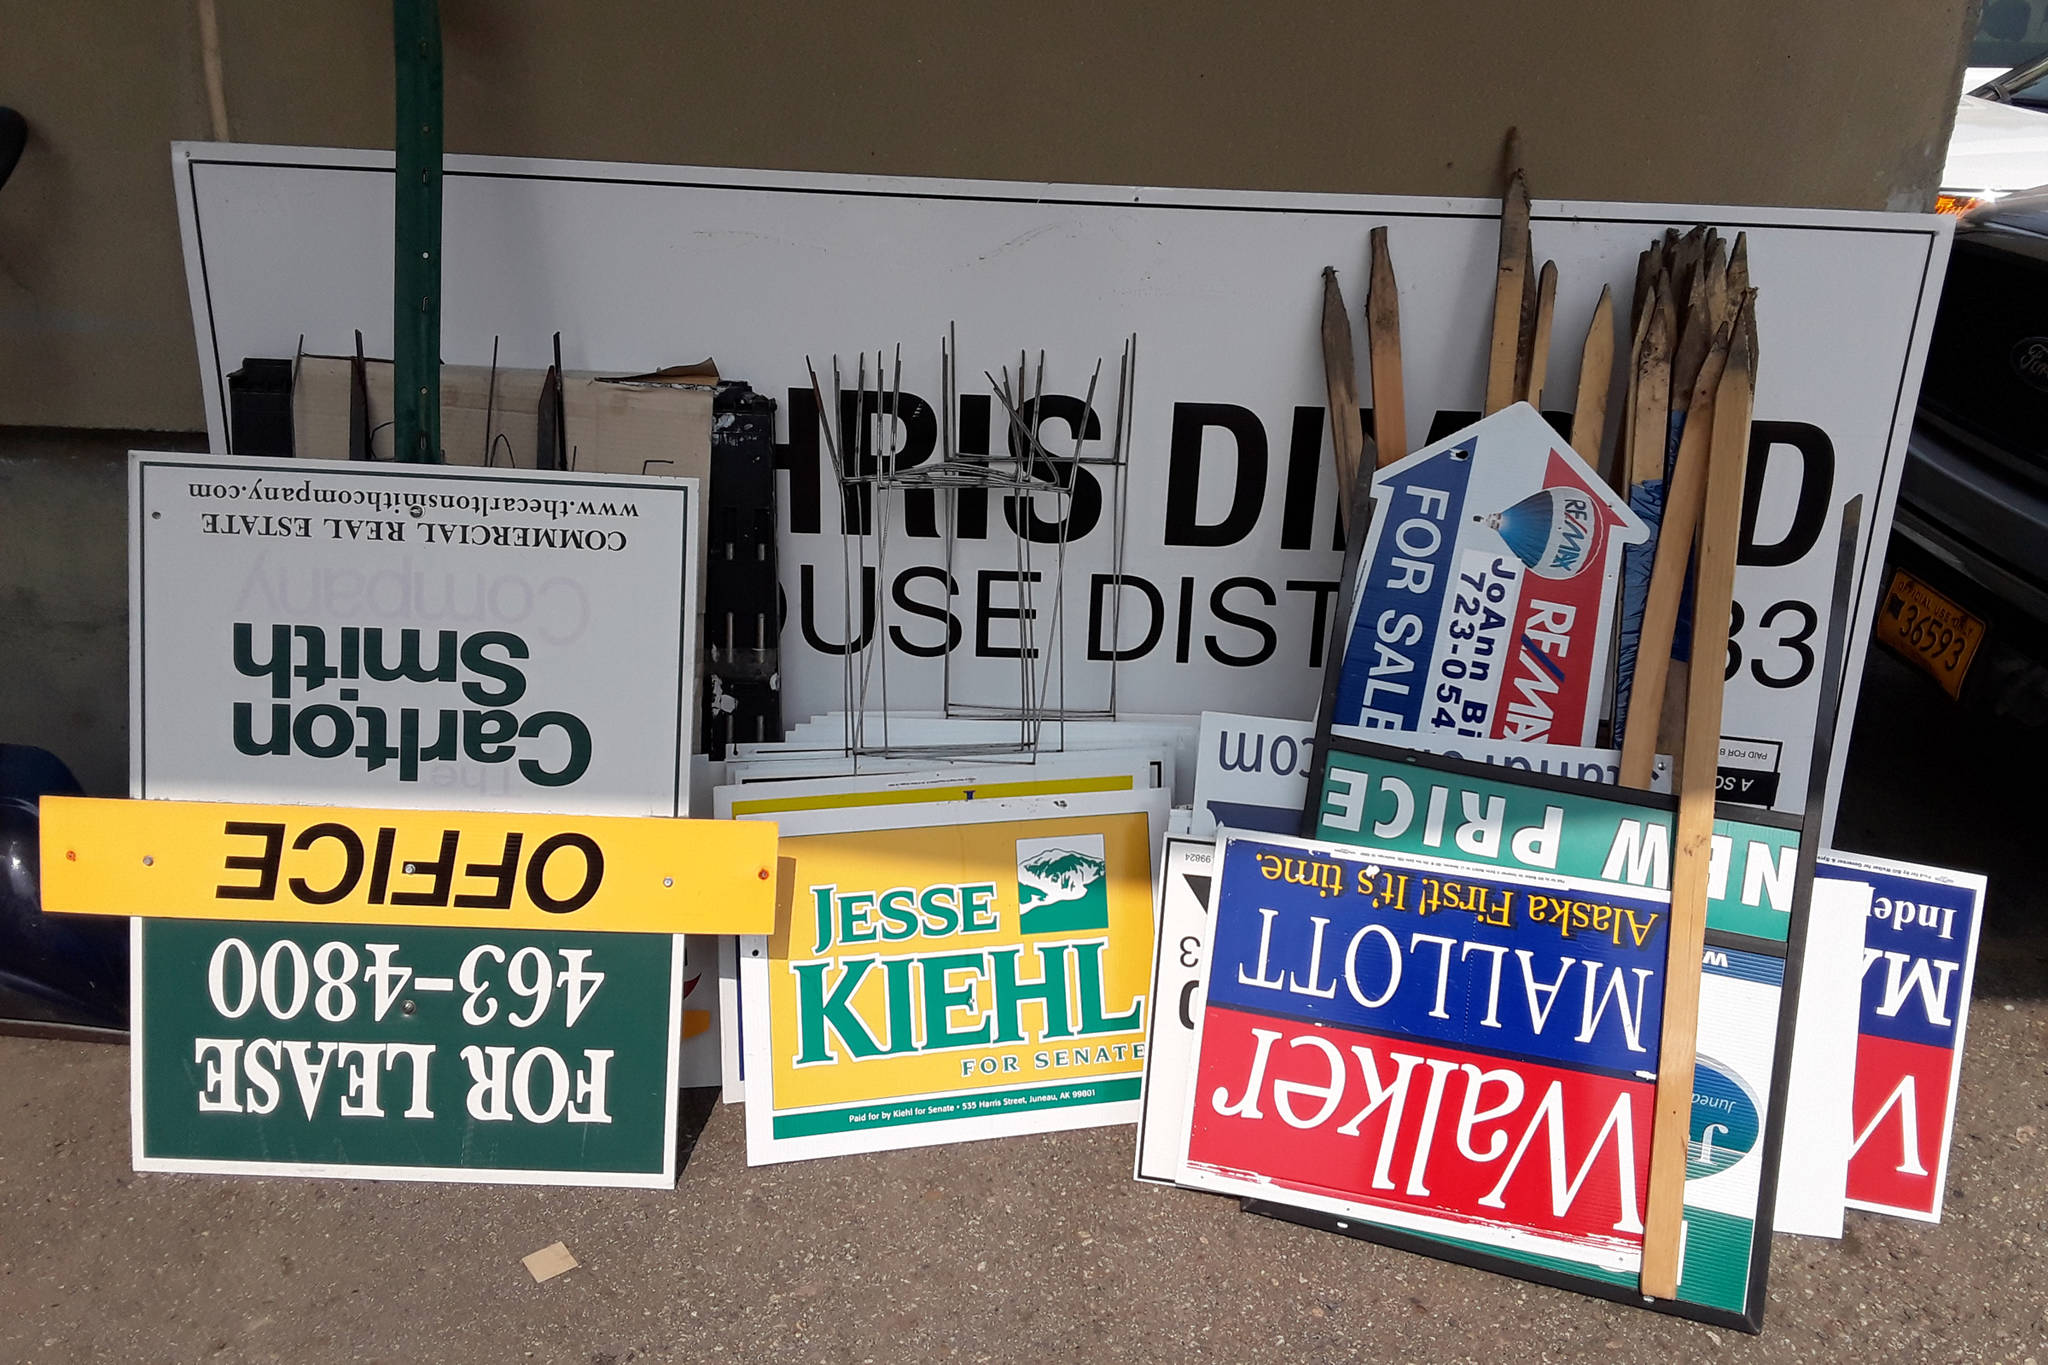 A collection of signs confiscated in Juneau is seen at an Alaska Department of Transportation and Public Facilities facility on July 24, 2018 in this image provided by the DOT. (Courtesy photo)